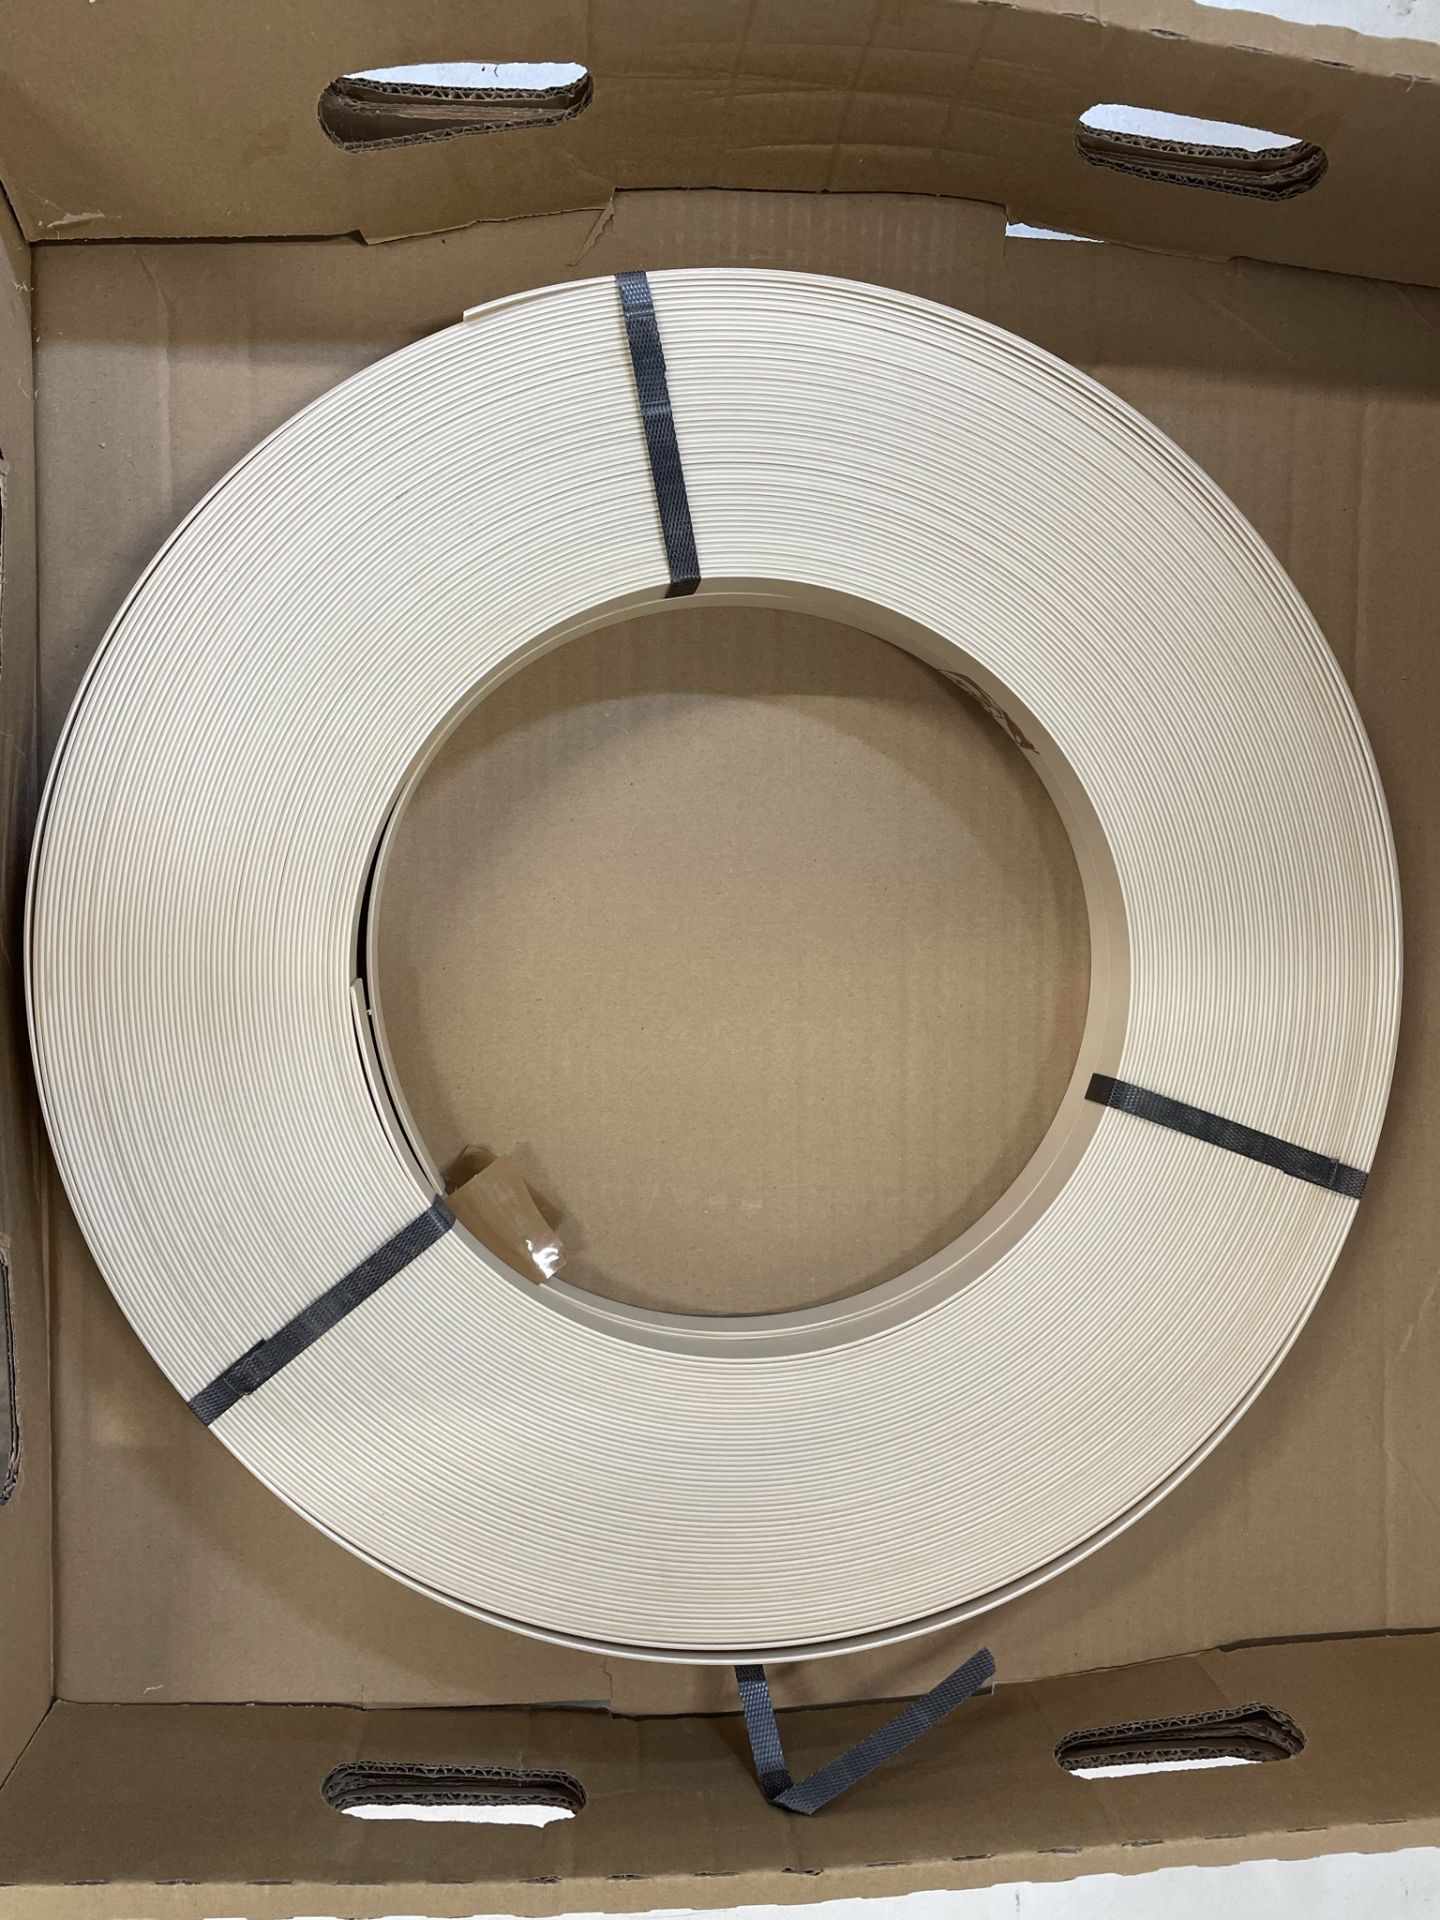 3 x Reels of 2mm Ostermann Maple Wooden Effect Edging Strip - Image 2 of 5